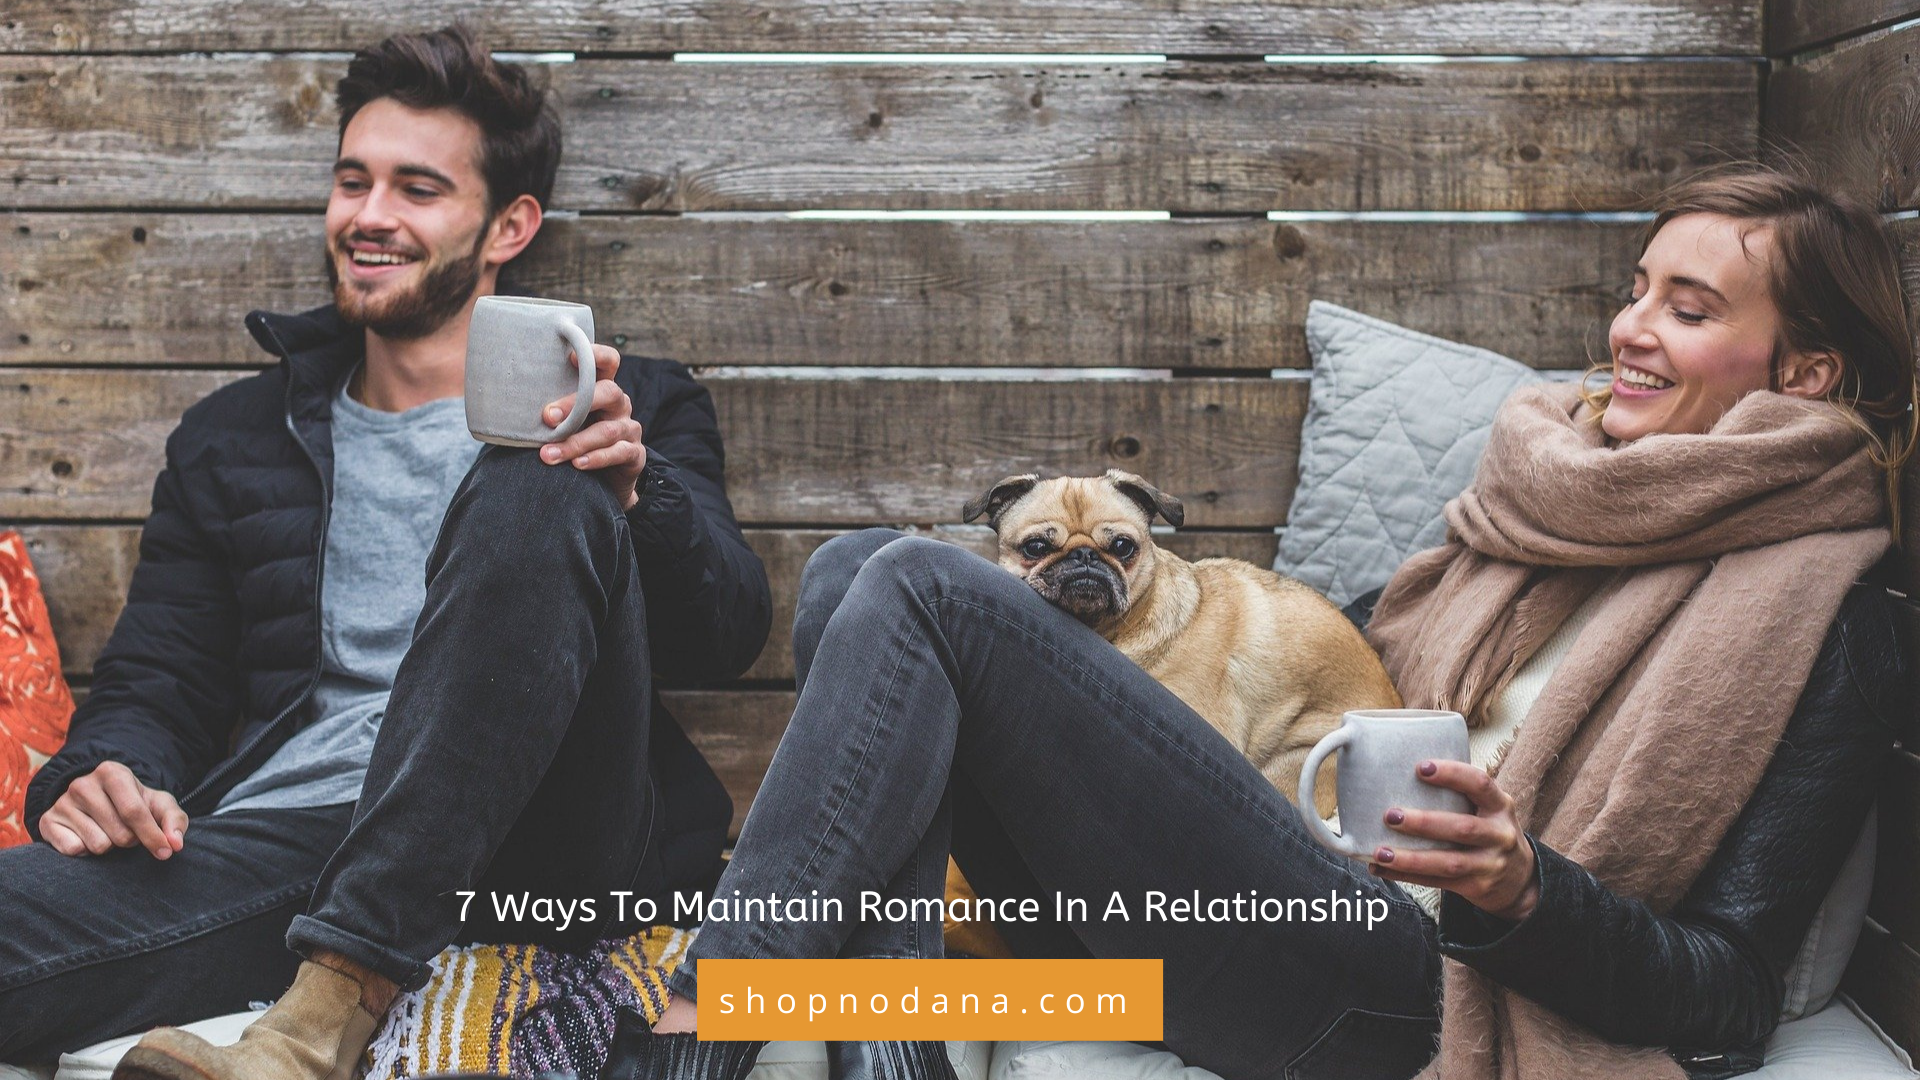 7 Ways To Maintain Romance In A Relationship